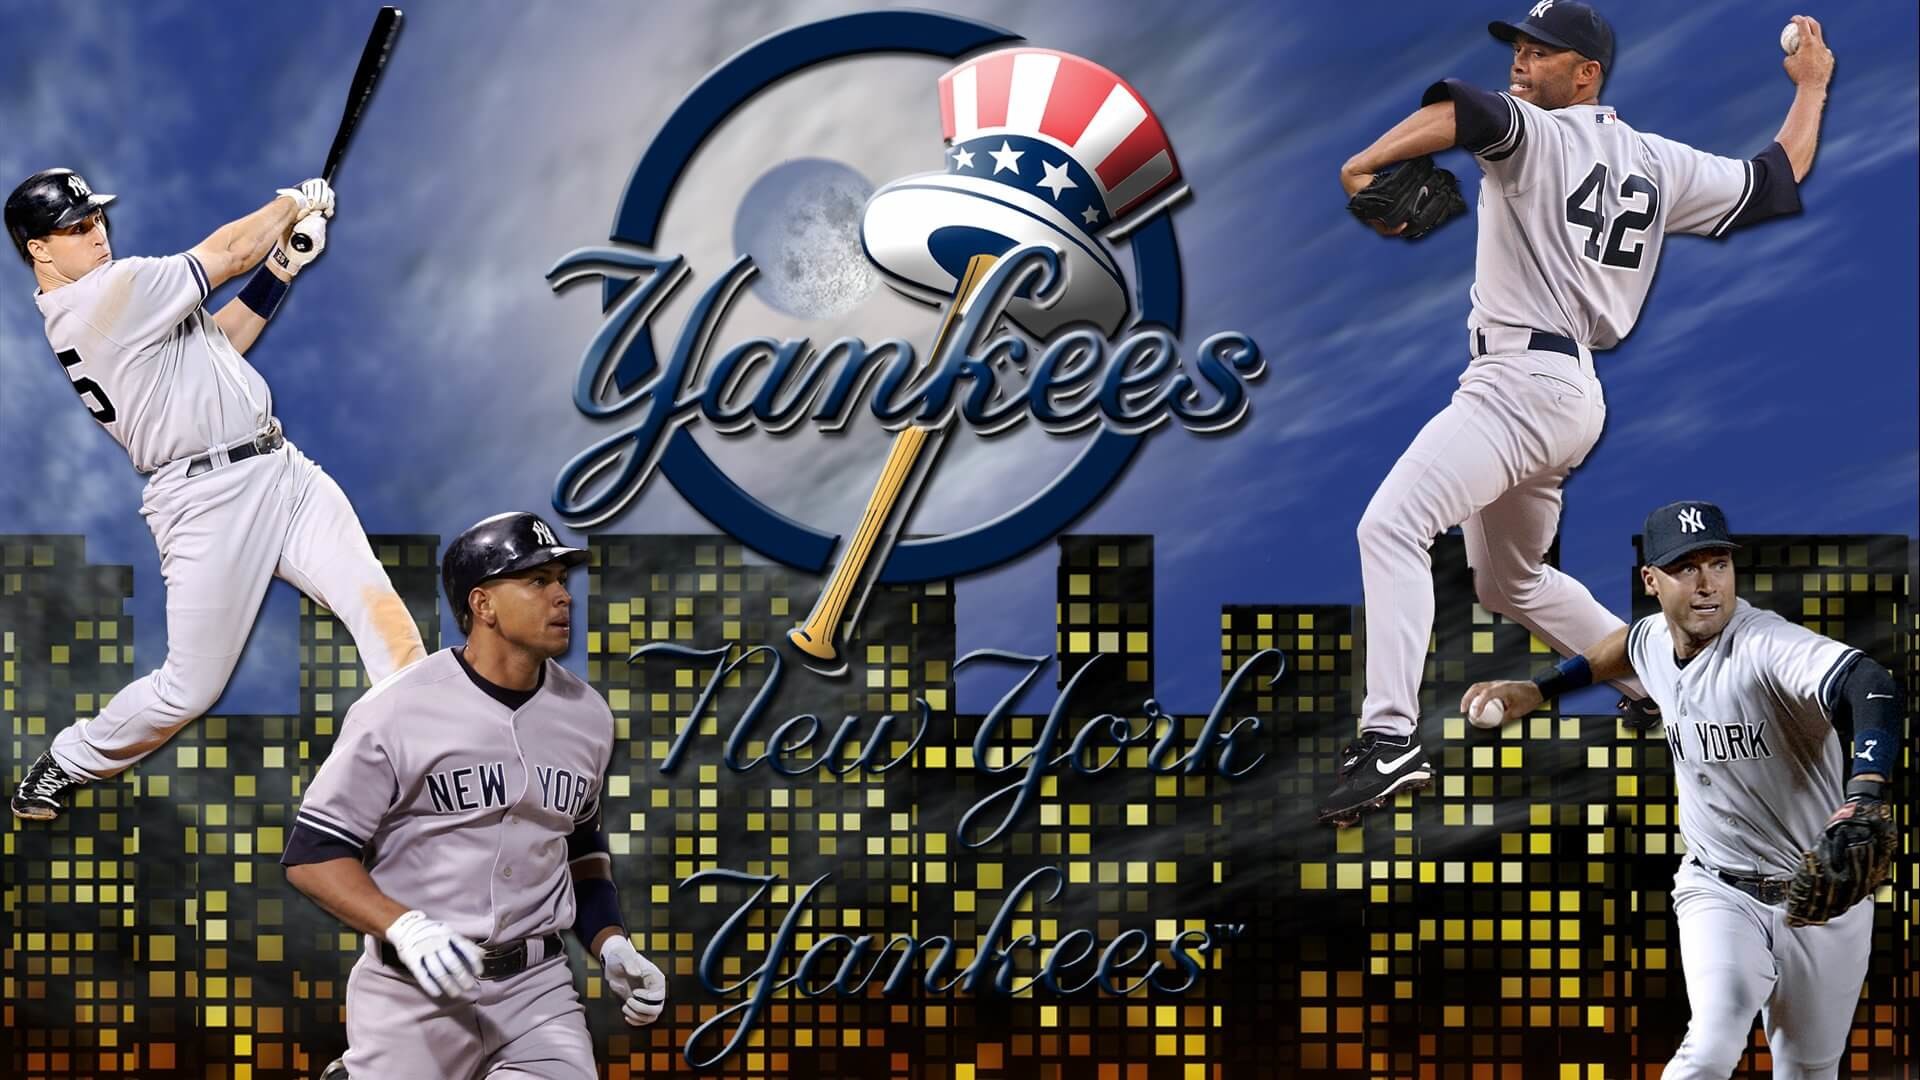 1920x1080 New York Yankees Wallpaper for iPad 1920 1080 HD For Ipad Apps